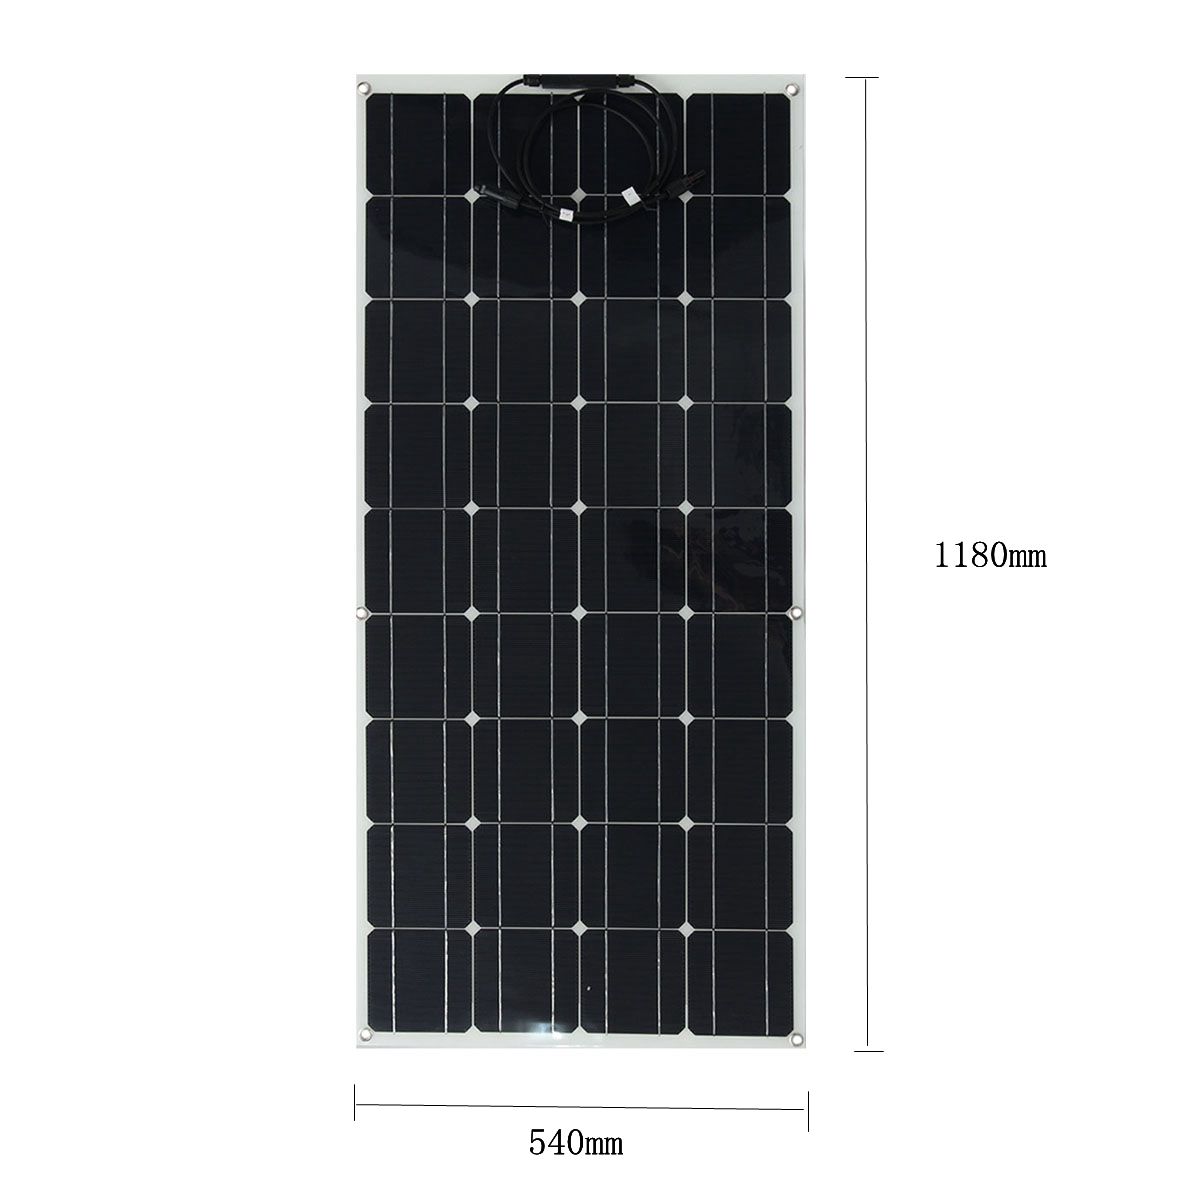 Elfeland® SP-39 120W 1180*540mm Semi-Flexible Solar Panel With 1.5m Cable Front Junction Box 6